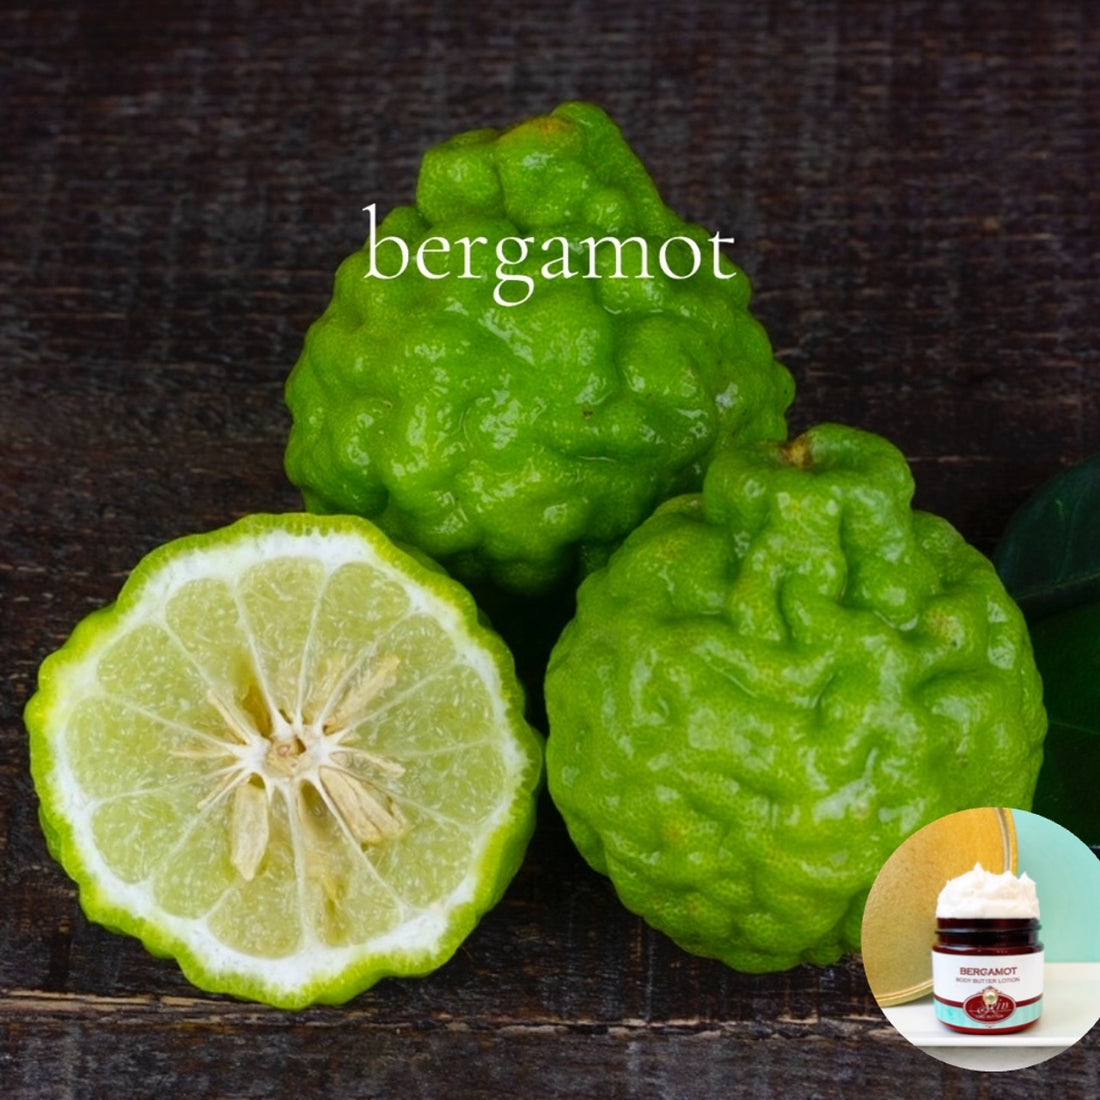 BERGAMOT scented Body Butter - BOGO - Buy one 16 oz family size, get 1 any size 50% off deal